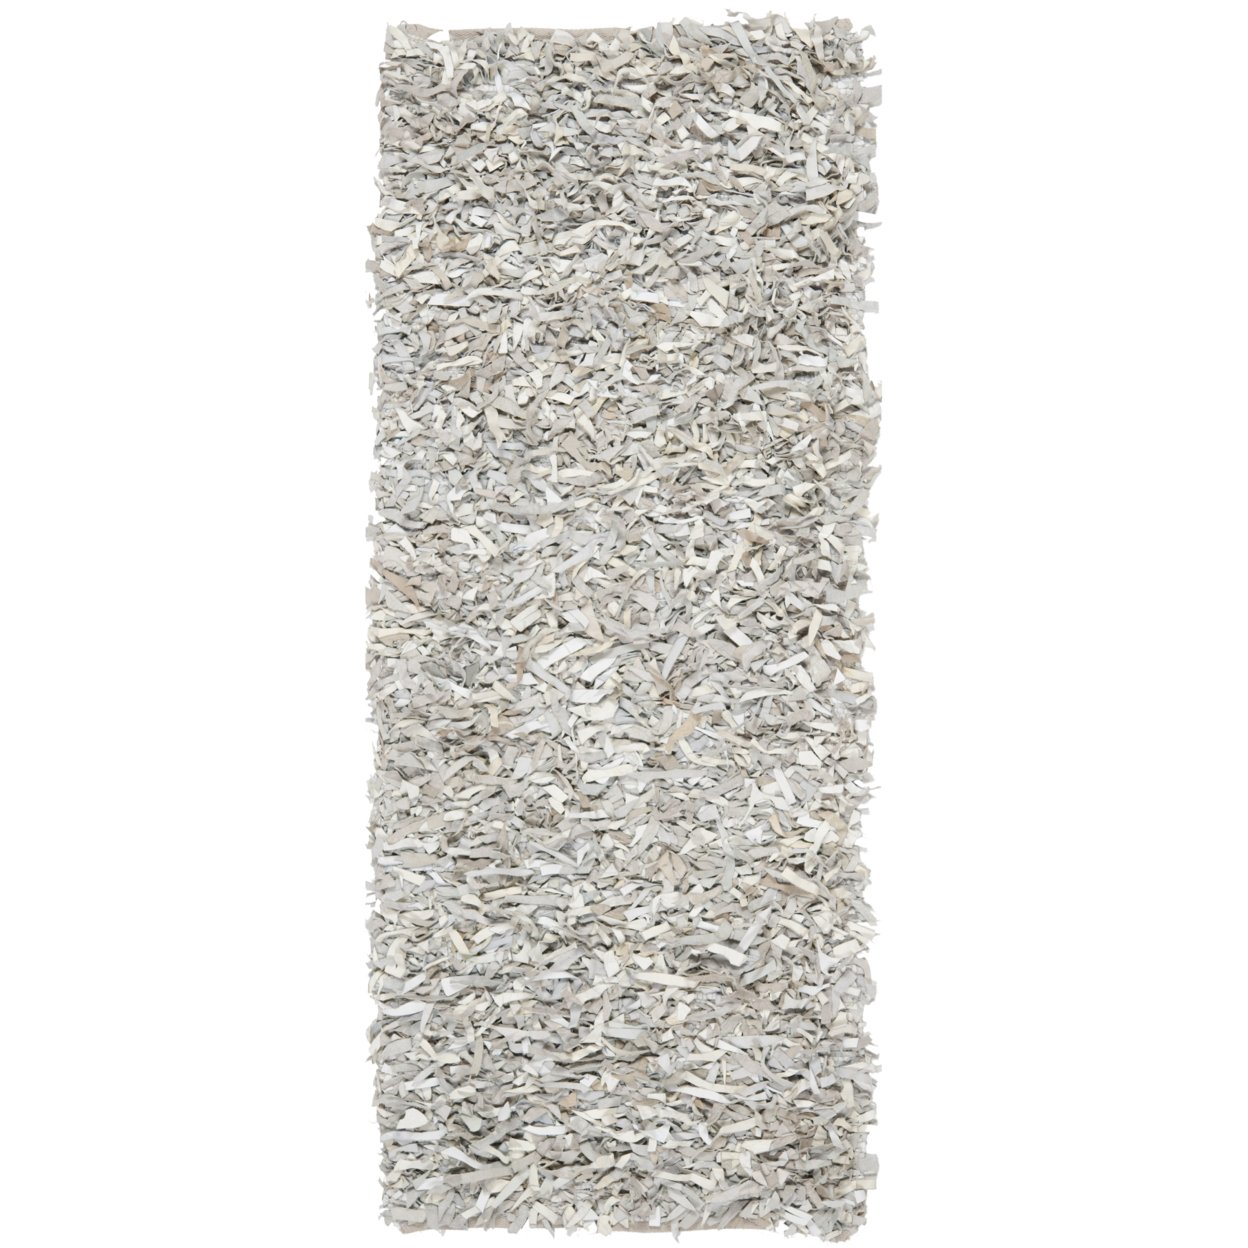 SAFAVIEH Leather Shag LSG511C Hand-knotted White Rug - 2' 3 X 4'